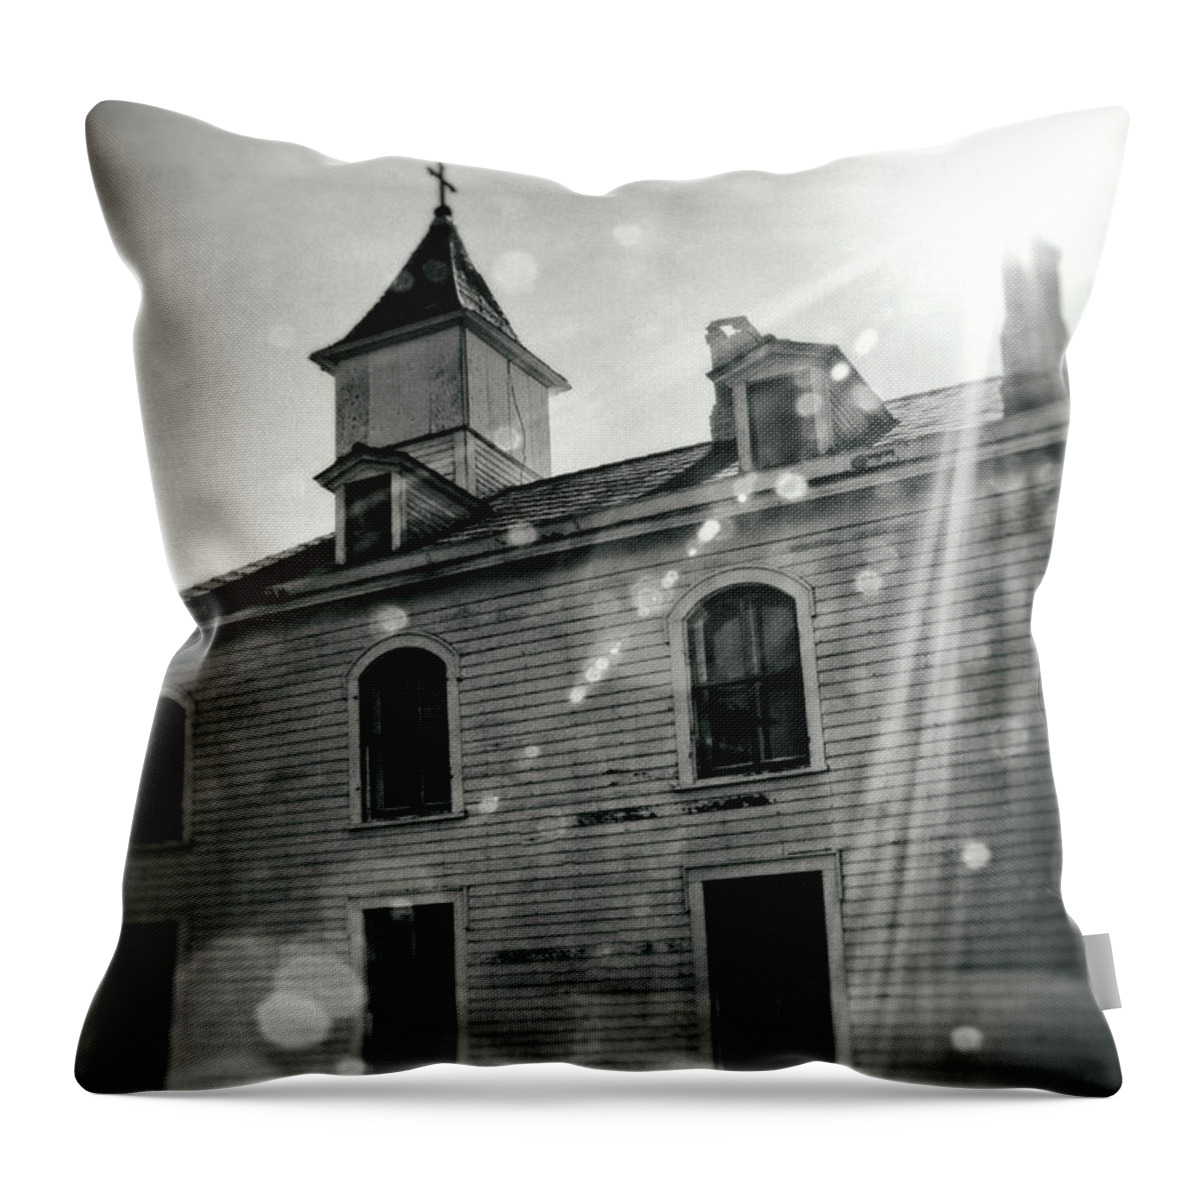 Convent Throw Pillow featuring the photograph Deep Morning Sun by Cynthia Dickinson